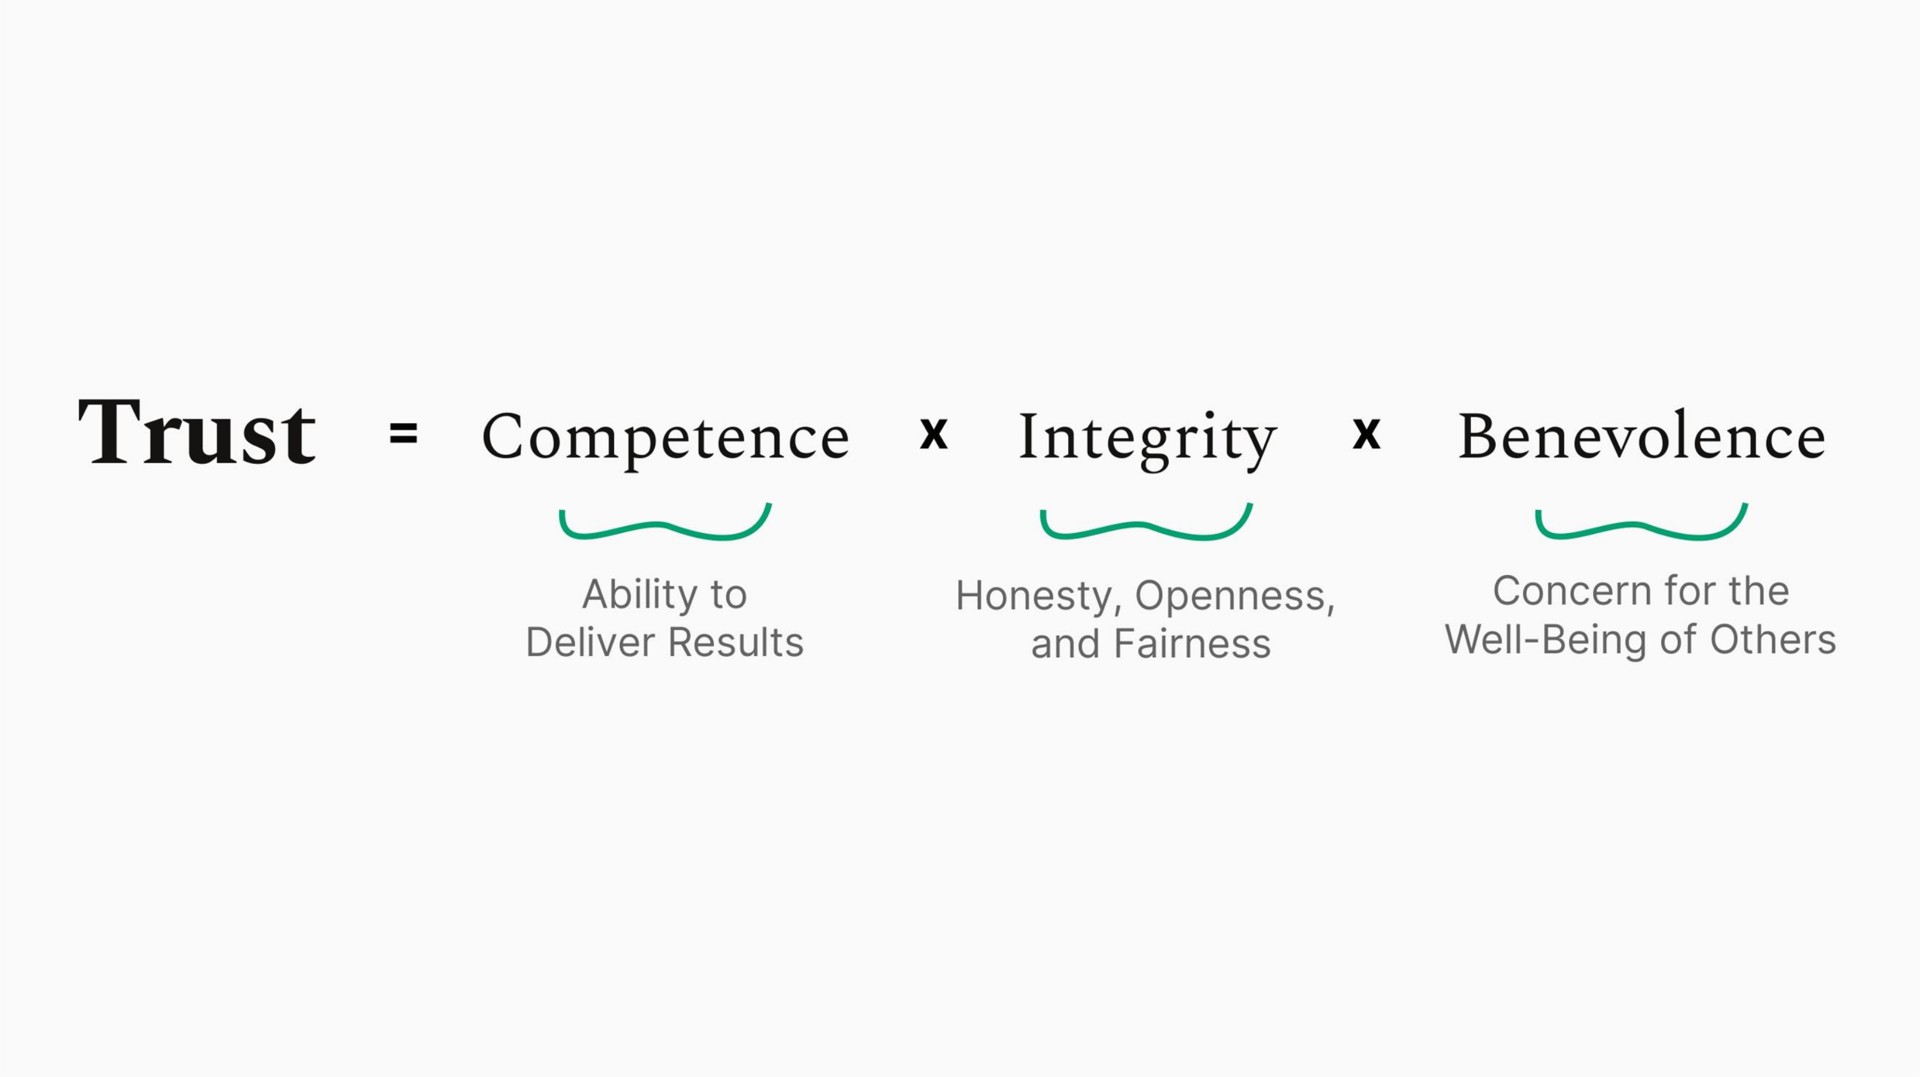 trust competence integrity benevolence ability to deliver results honesty openness and fairness concern for the well being of | Sequoia Capital